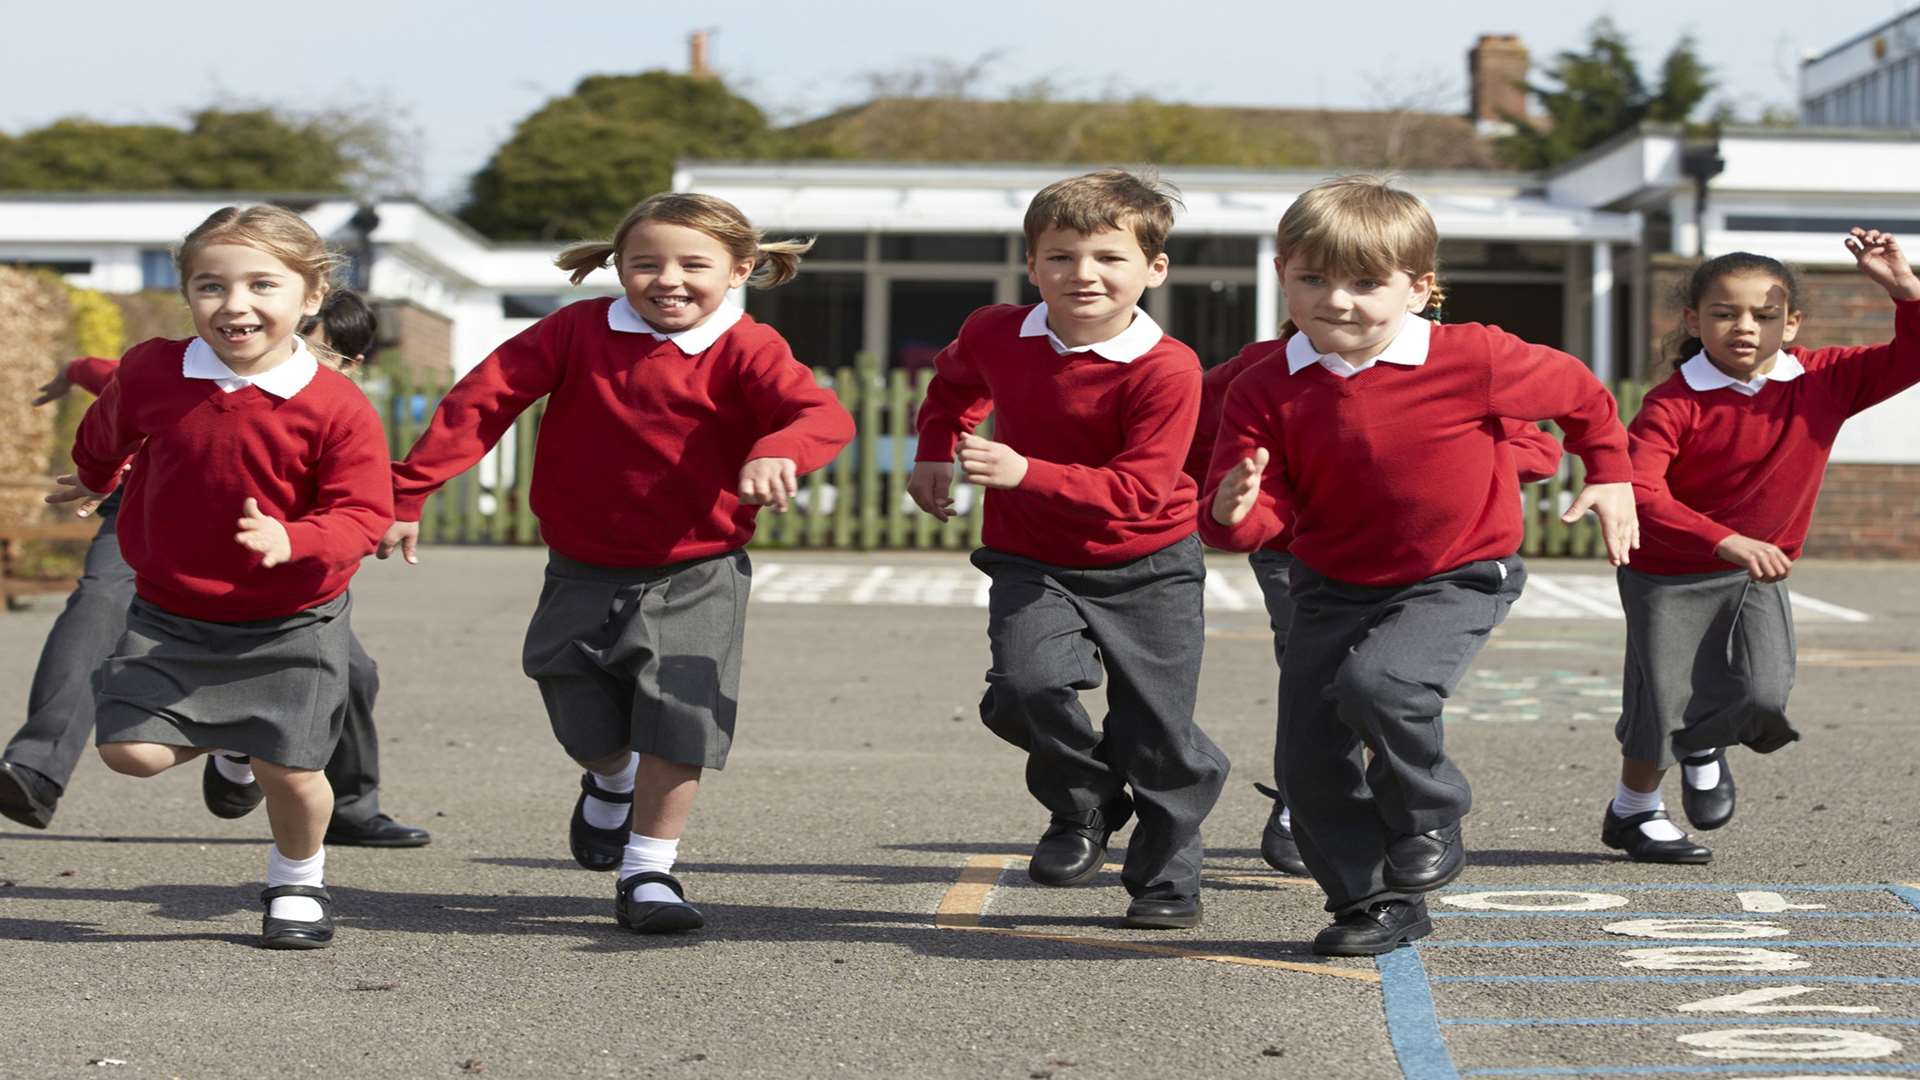 'Children are more enthusiastic about school life if they see their parents being part of it too'